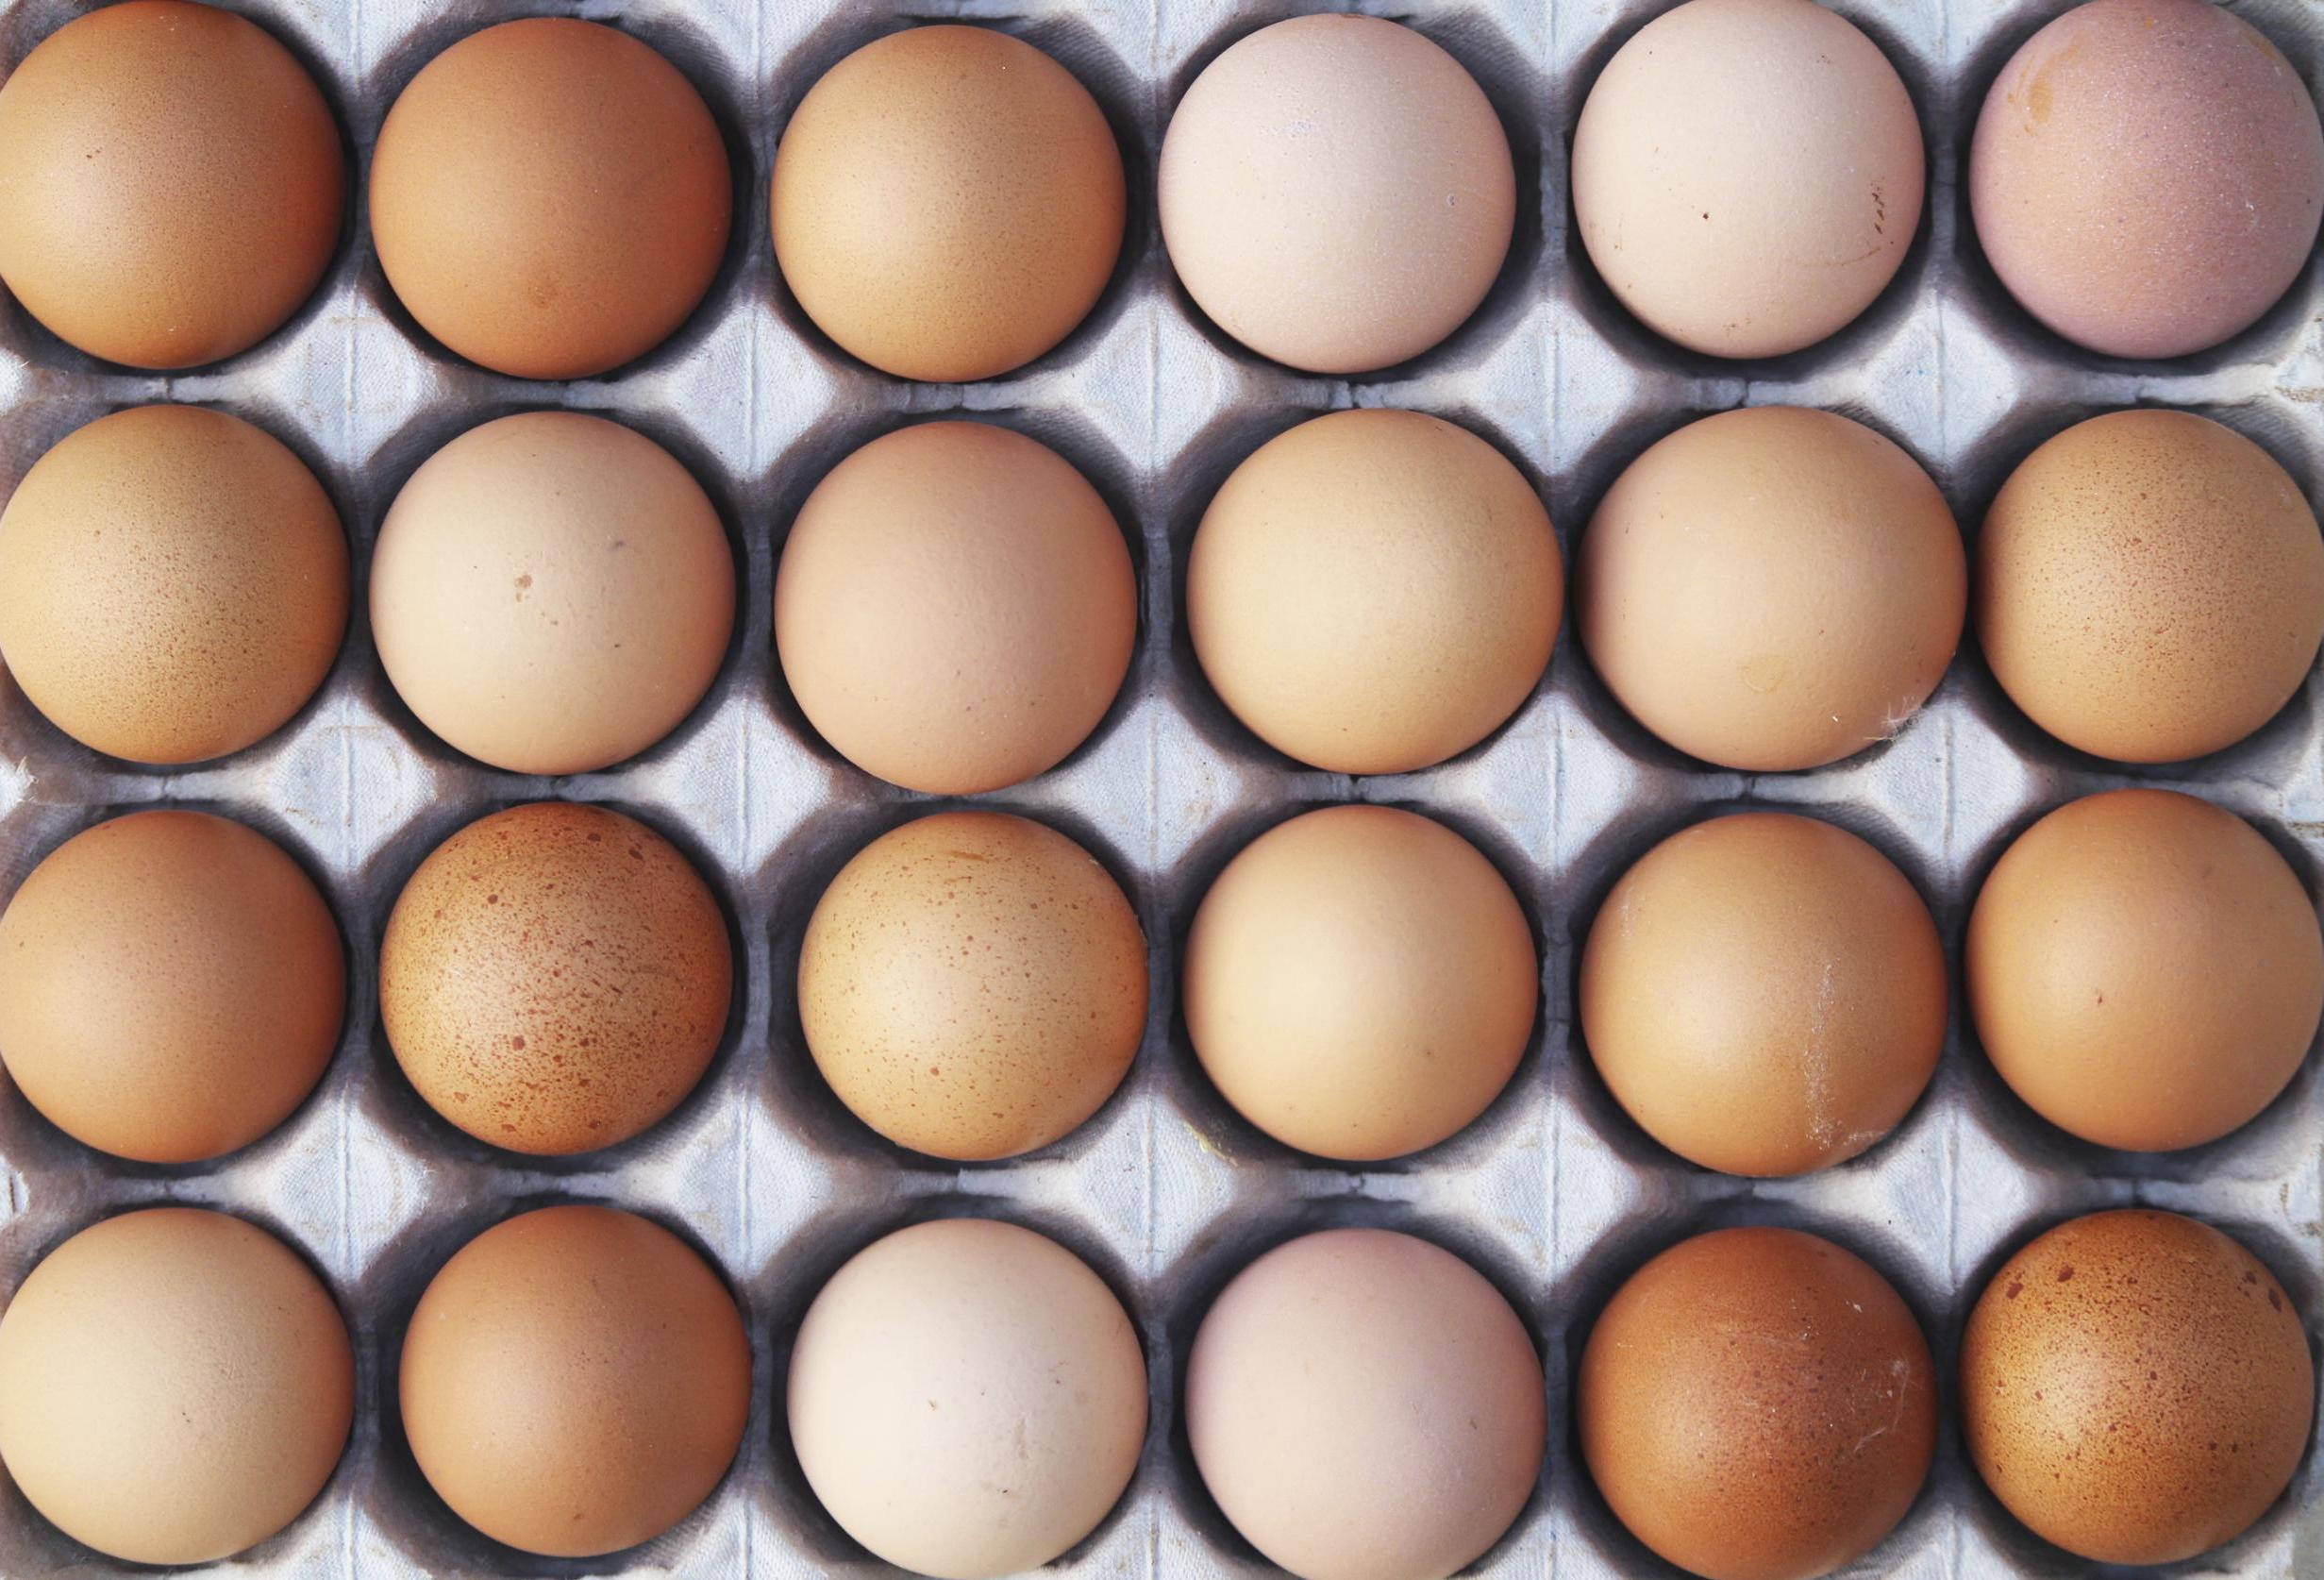 Free range egg packs will now temporarily carry stickers from 1 March, informing consumers that the eggs have been laid by hens currently kept in barns